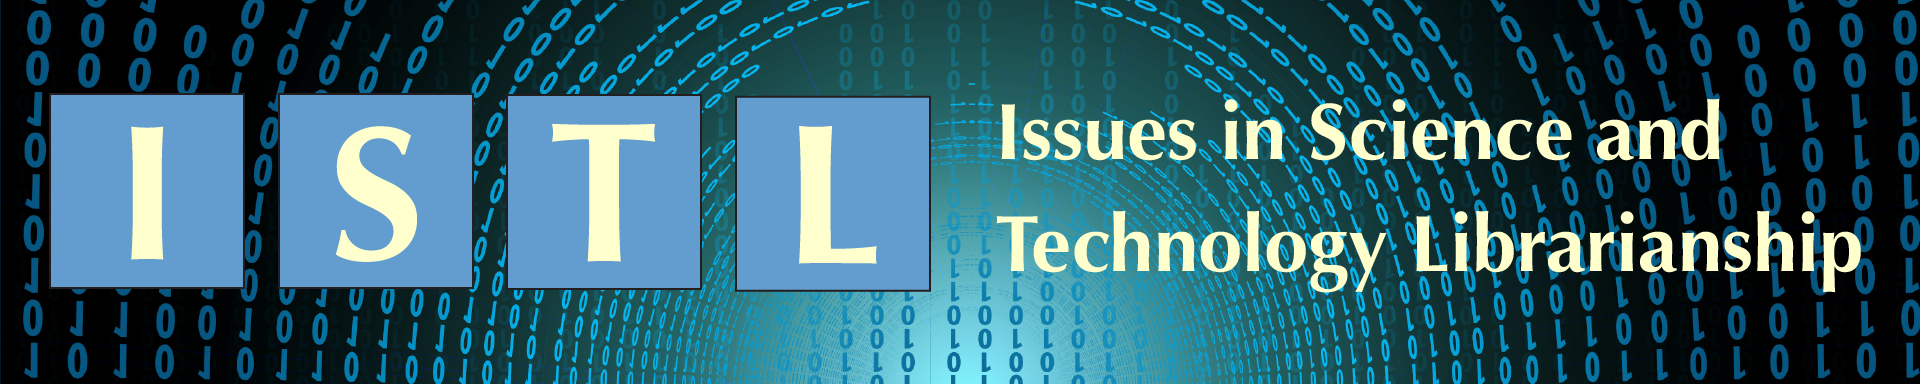 ISTL: Issues in Science and Technology Librarianship